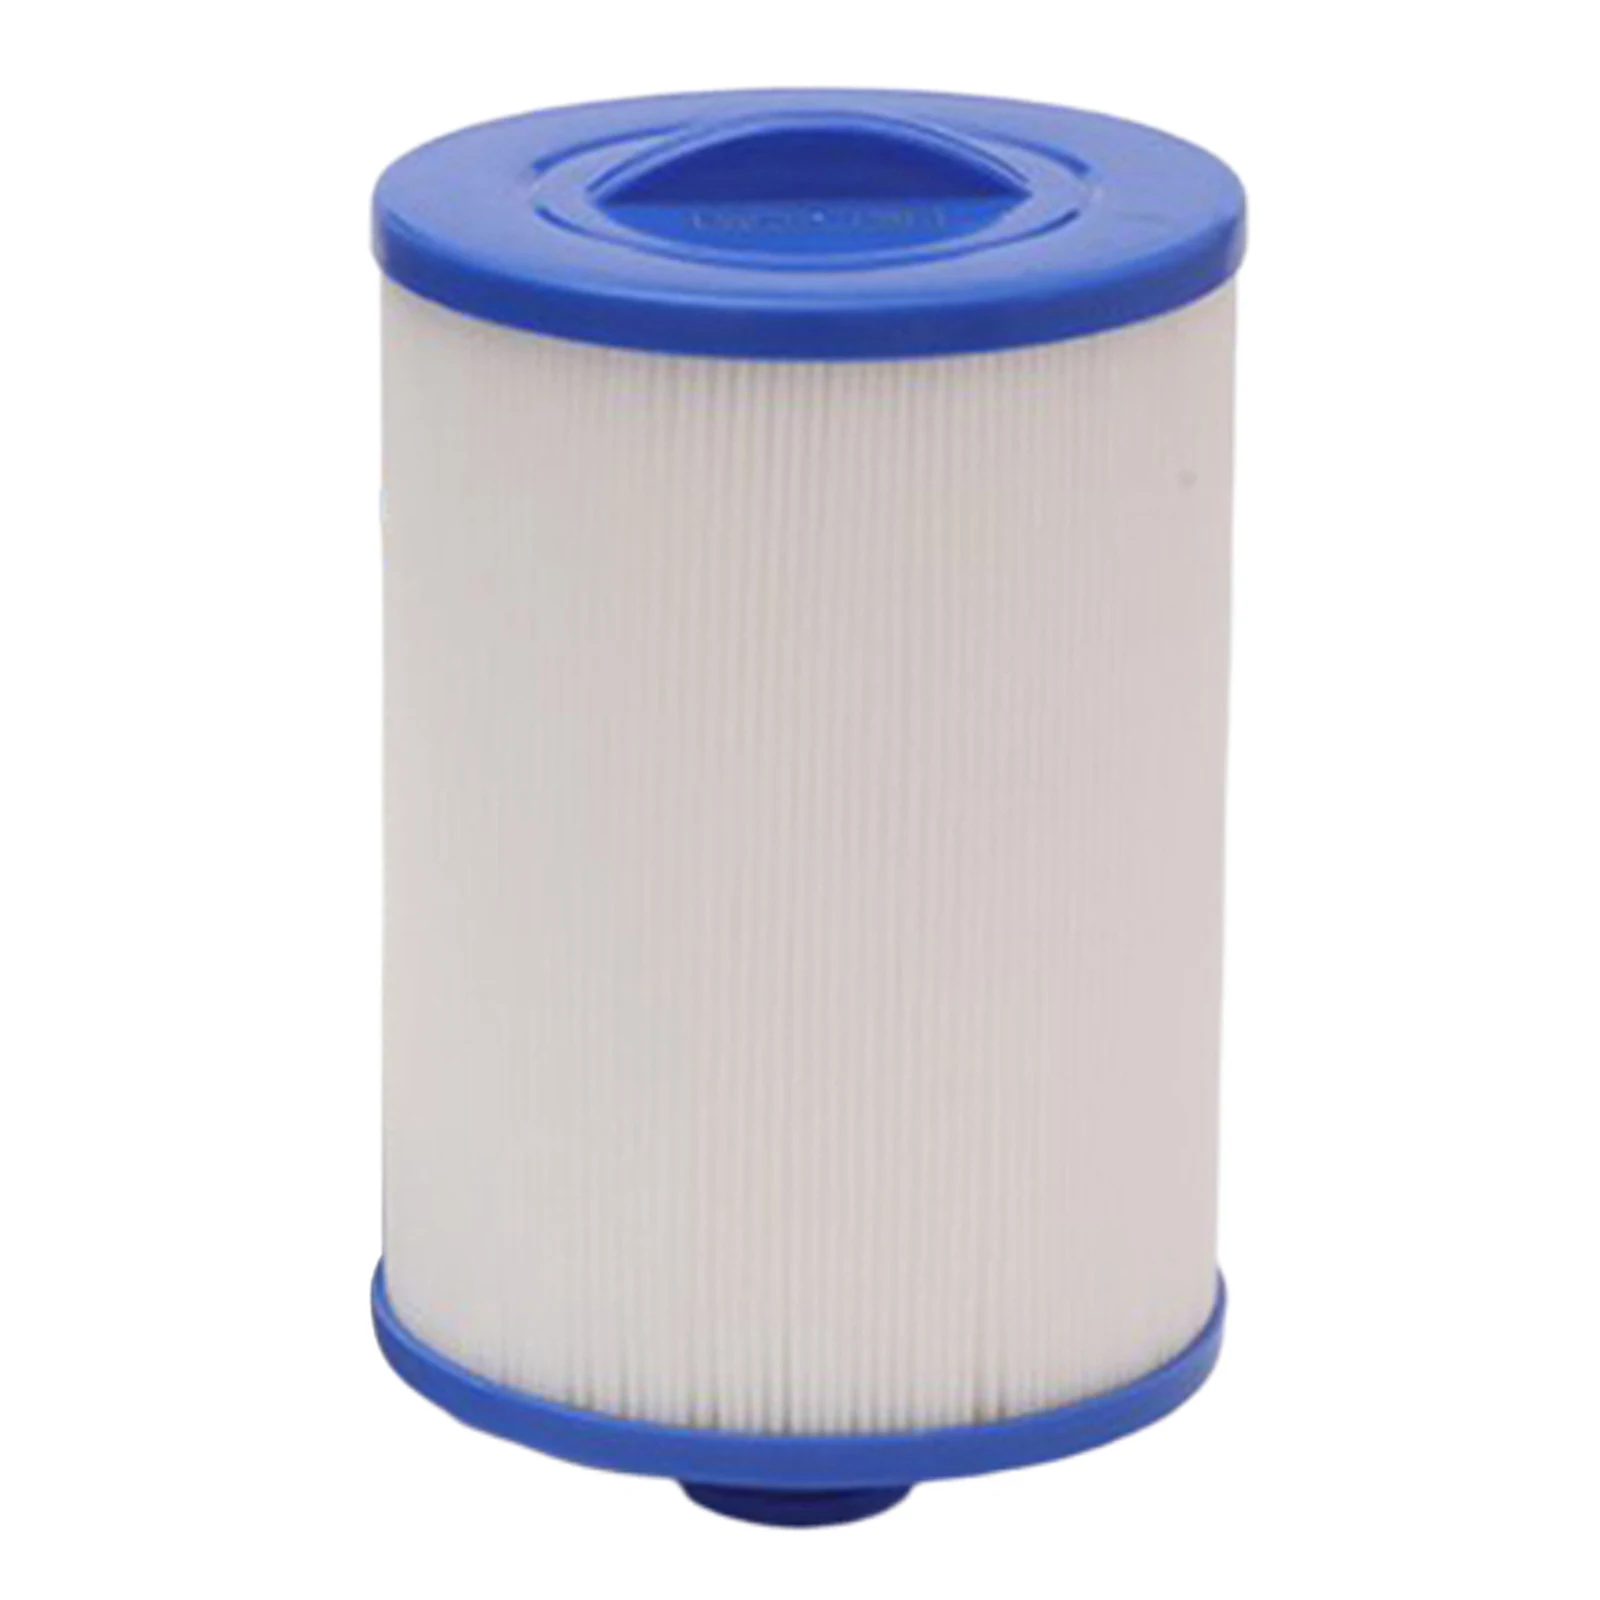 Spa Filter Cartridges Replacement for Pleatco PWW50P3 Spare Parts Premium